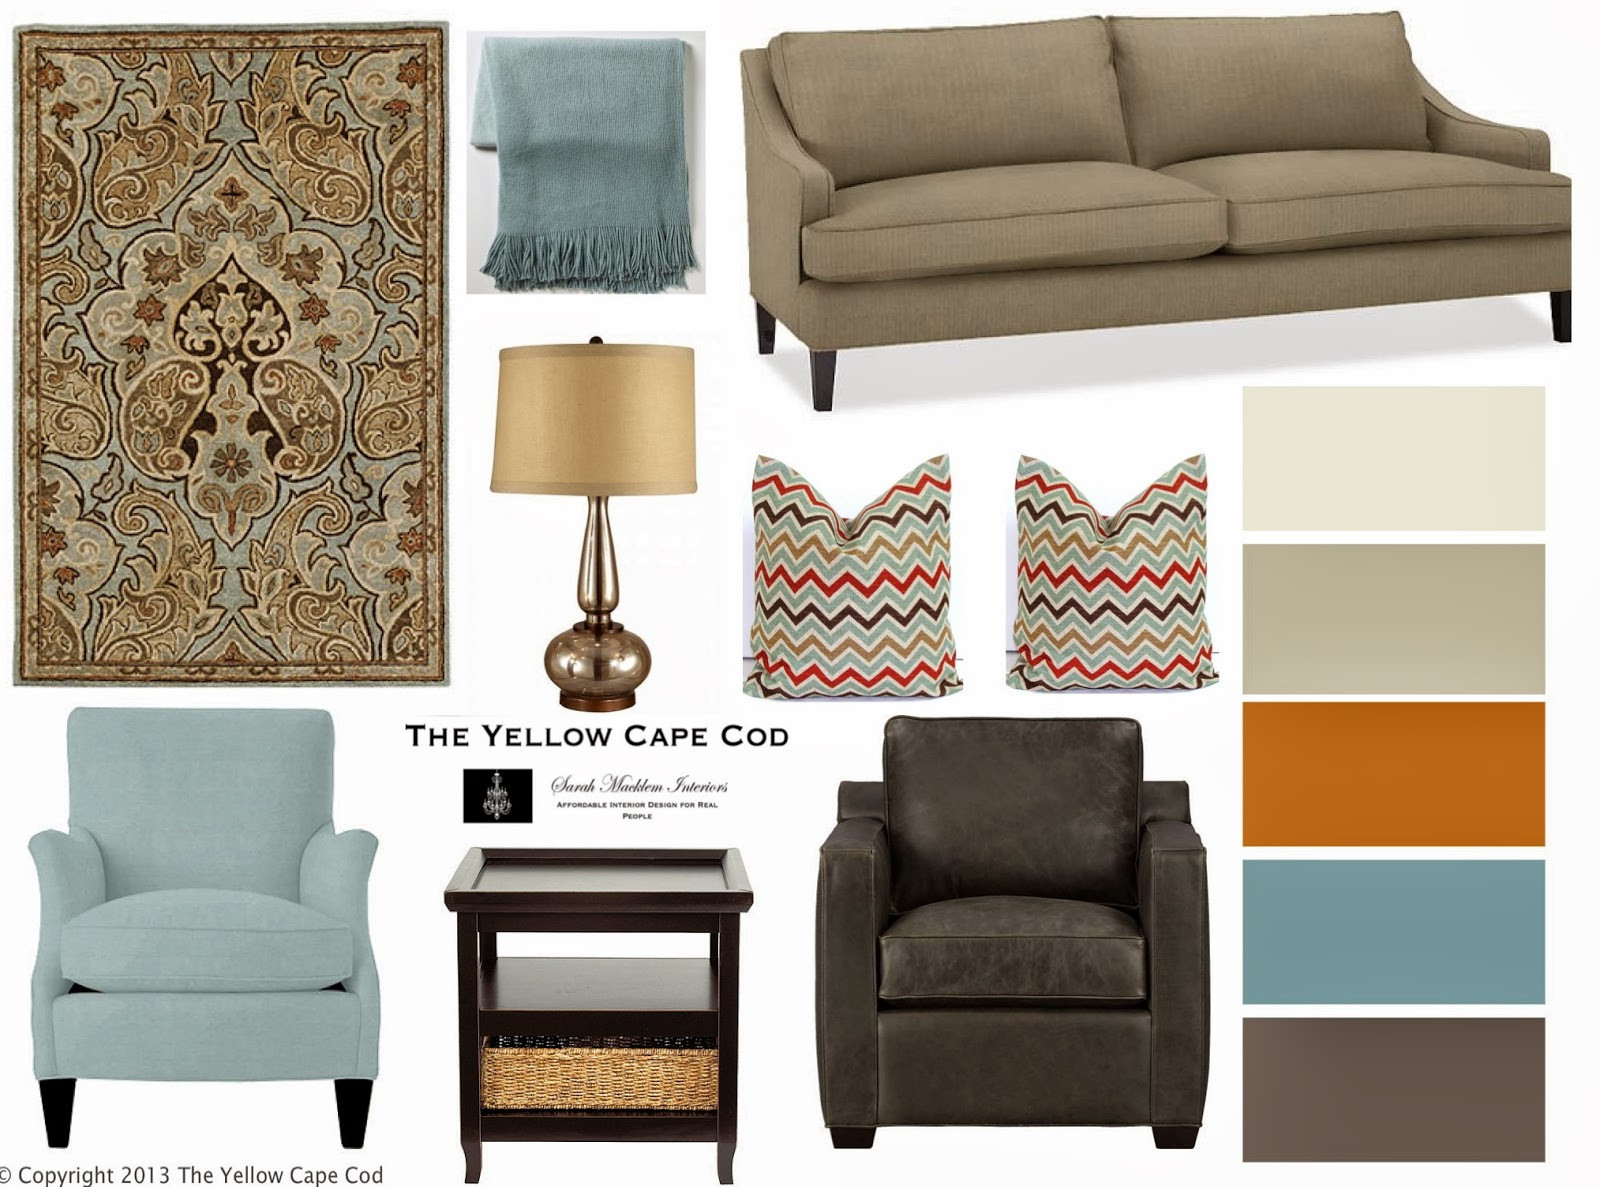 Living Room Chair Styles
 The Yellow Cape Cod His and Her Chairs How to mix